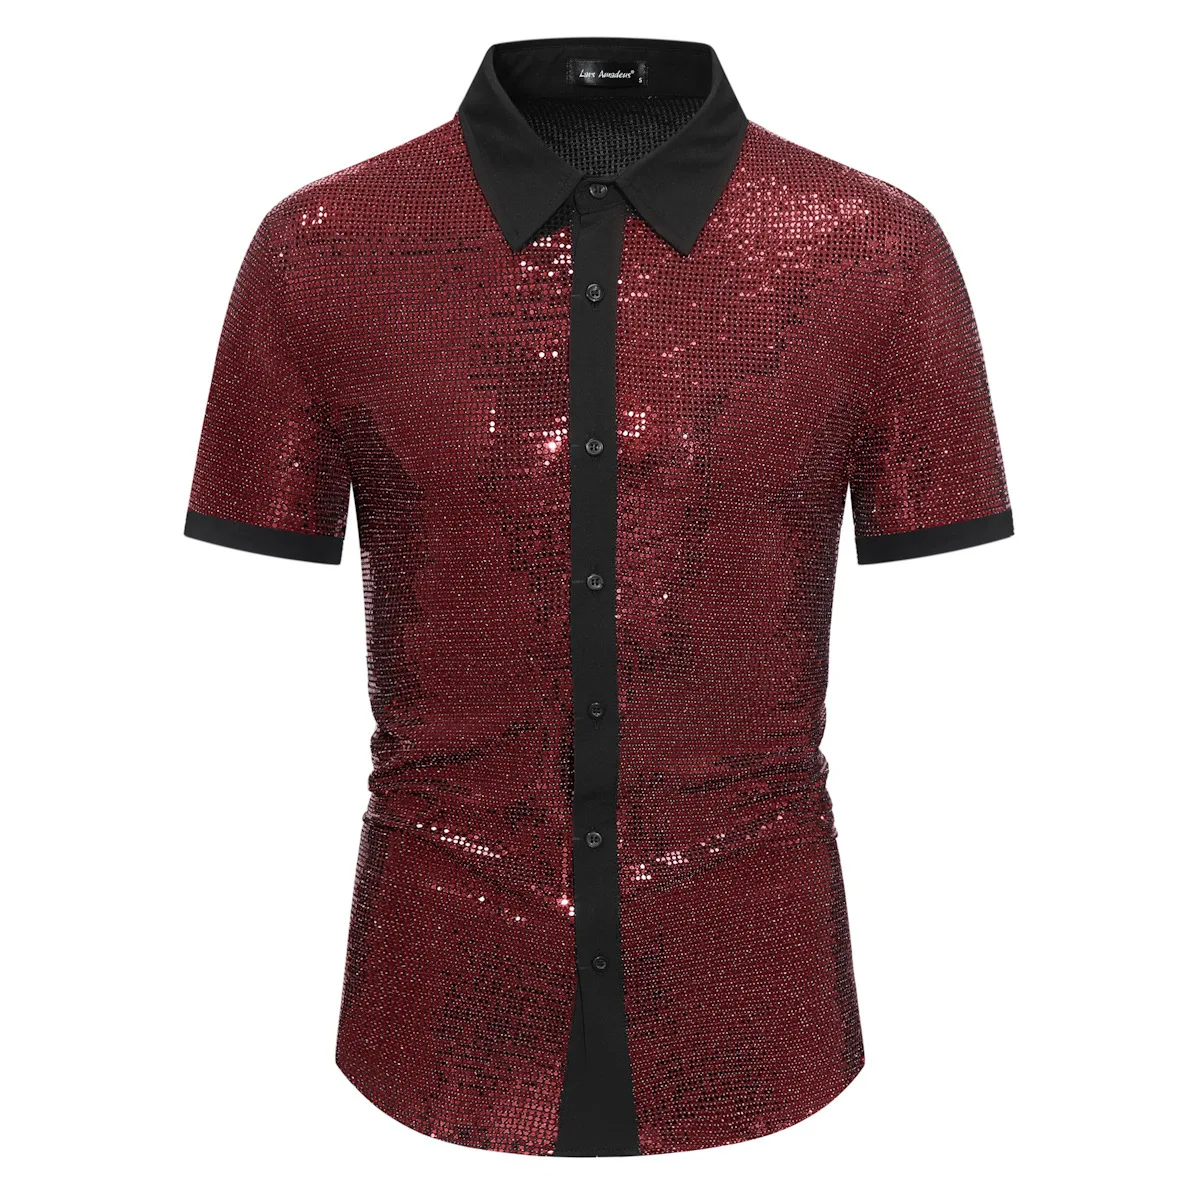 

Mens Shiny Red Sequin Metallic Shirts Hipster 70s Disco Party Dance Singer Shirt Men Hip Hop Streetwear Casual Chemise Homme XXL